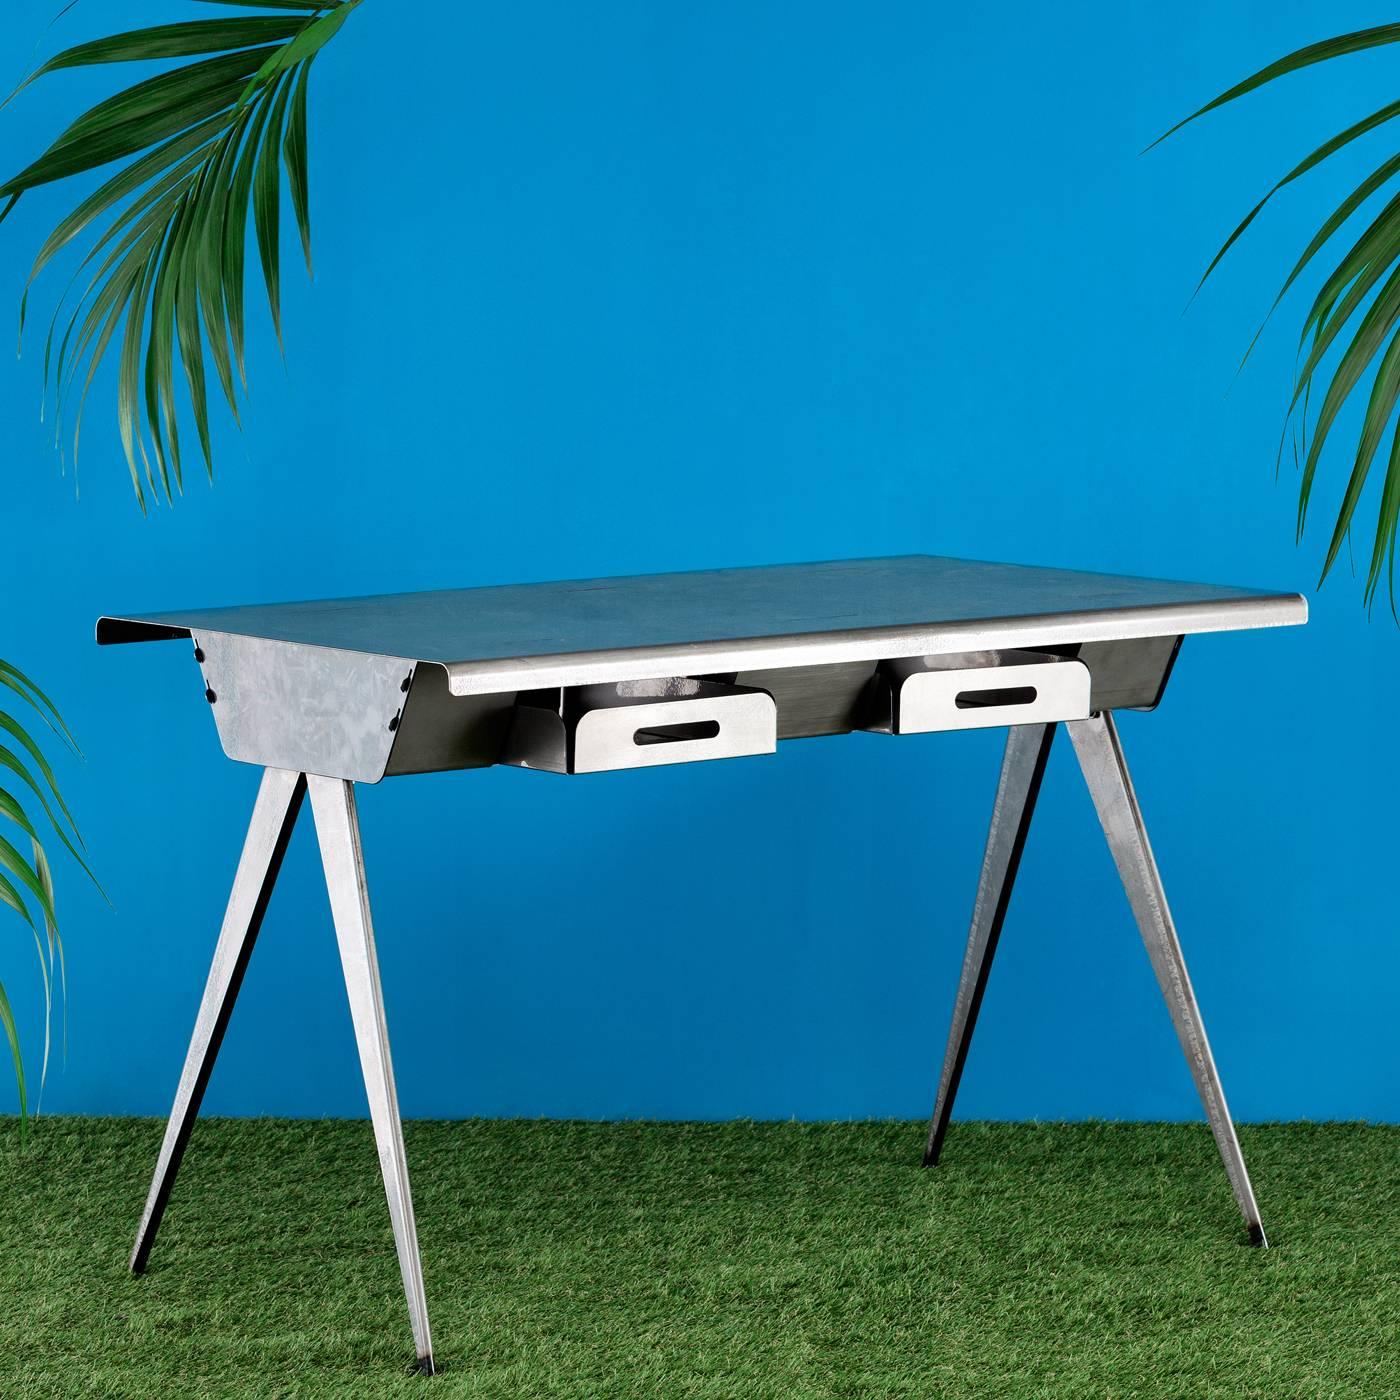 Elegance and functionality come together in this writing table. The delicate frame of this piece is crafted in sheets of steel and is fashioned with different folds forming the edges of the table's top and the two drawers that slide out from